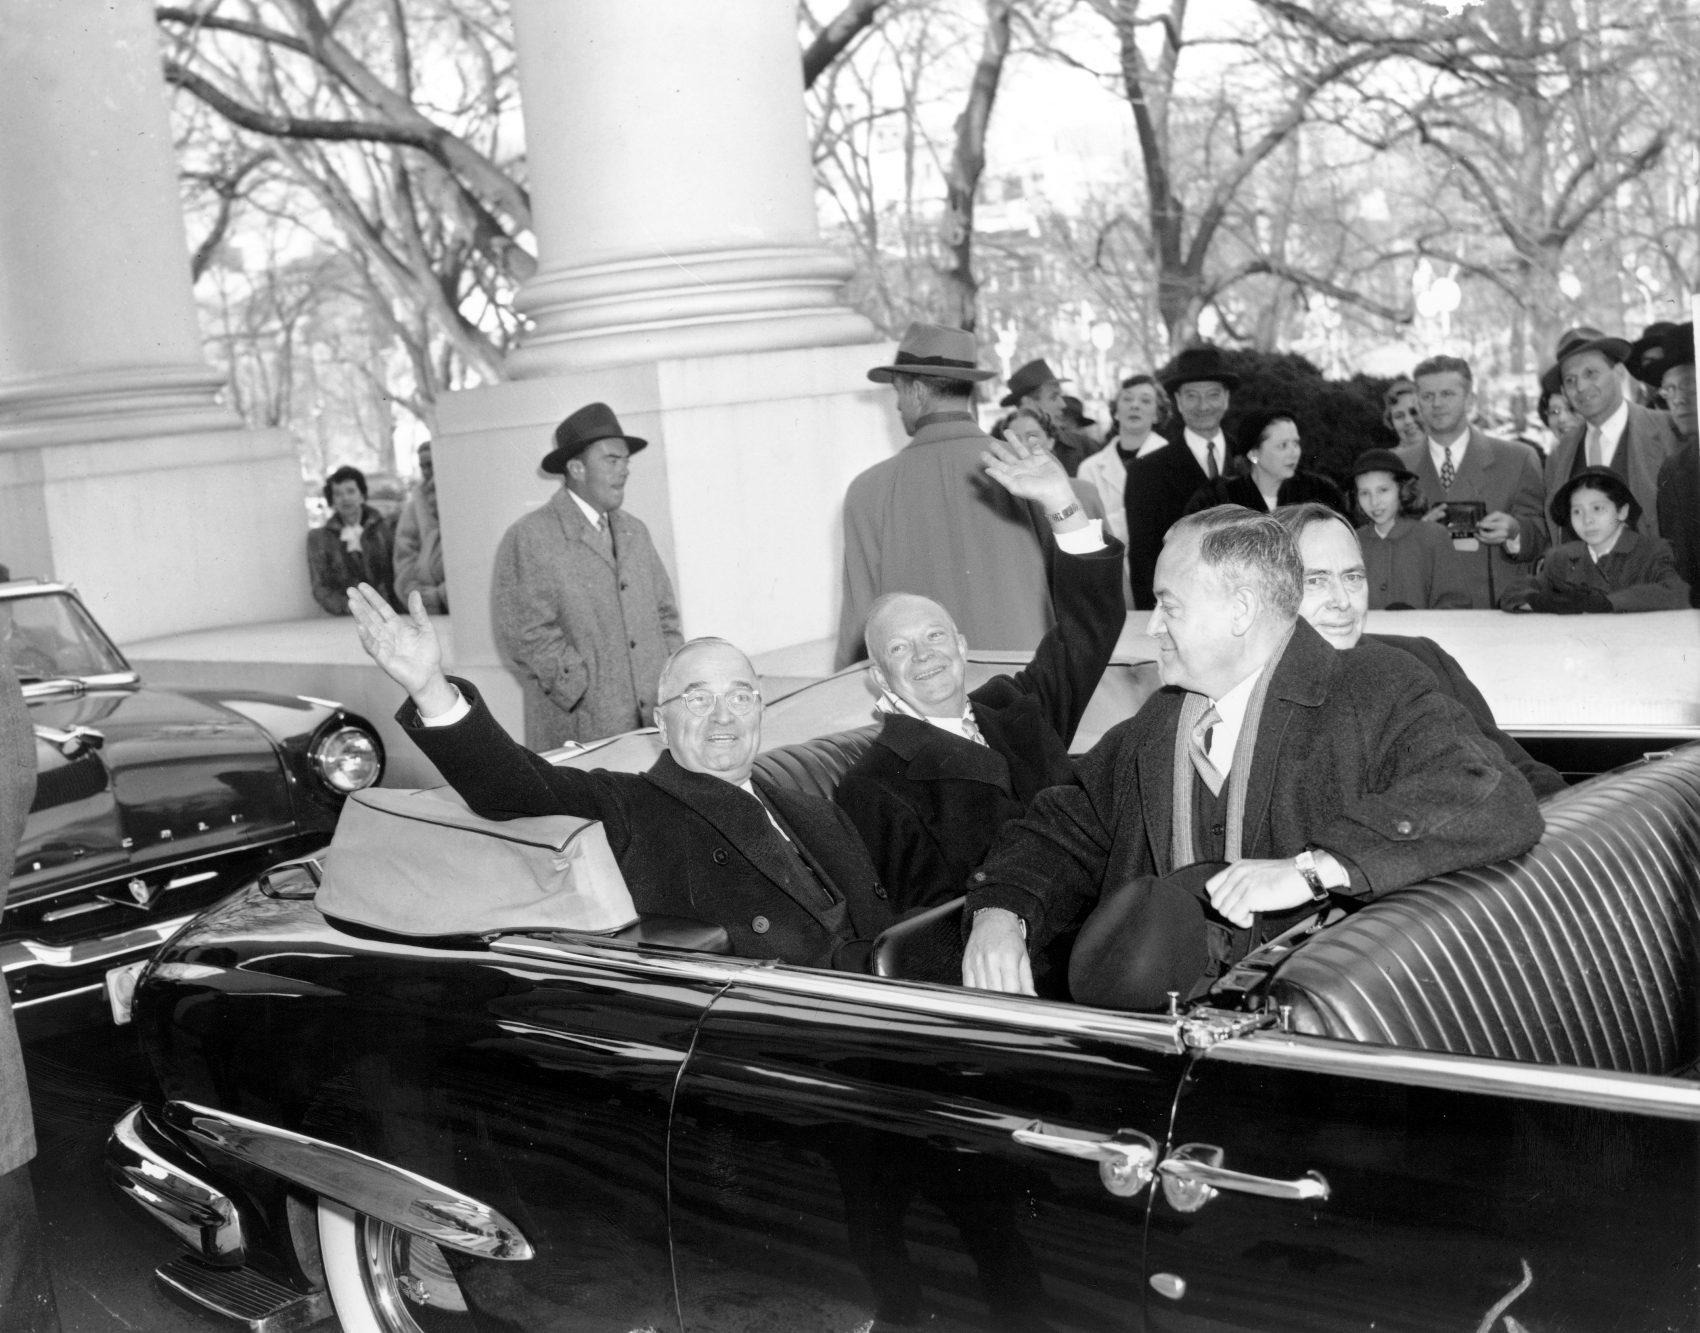 With smiles and a wave, President Harry Truman, left, and his successor, president-elect Dwight D. Eisenhower, leave the White House in an open car for inauguration ceremonies in Washington, D.C. on Jan. 20, 1953. Sitting in the front is Sen. Styles Bridges of New Hampshire, and behind him is House Speaker Joe Martin. (AP)